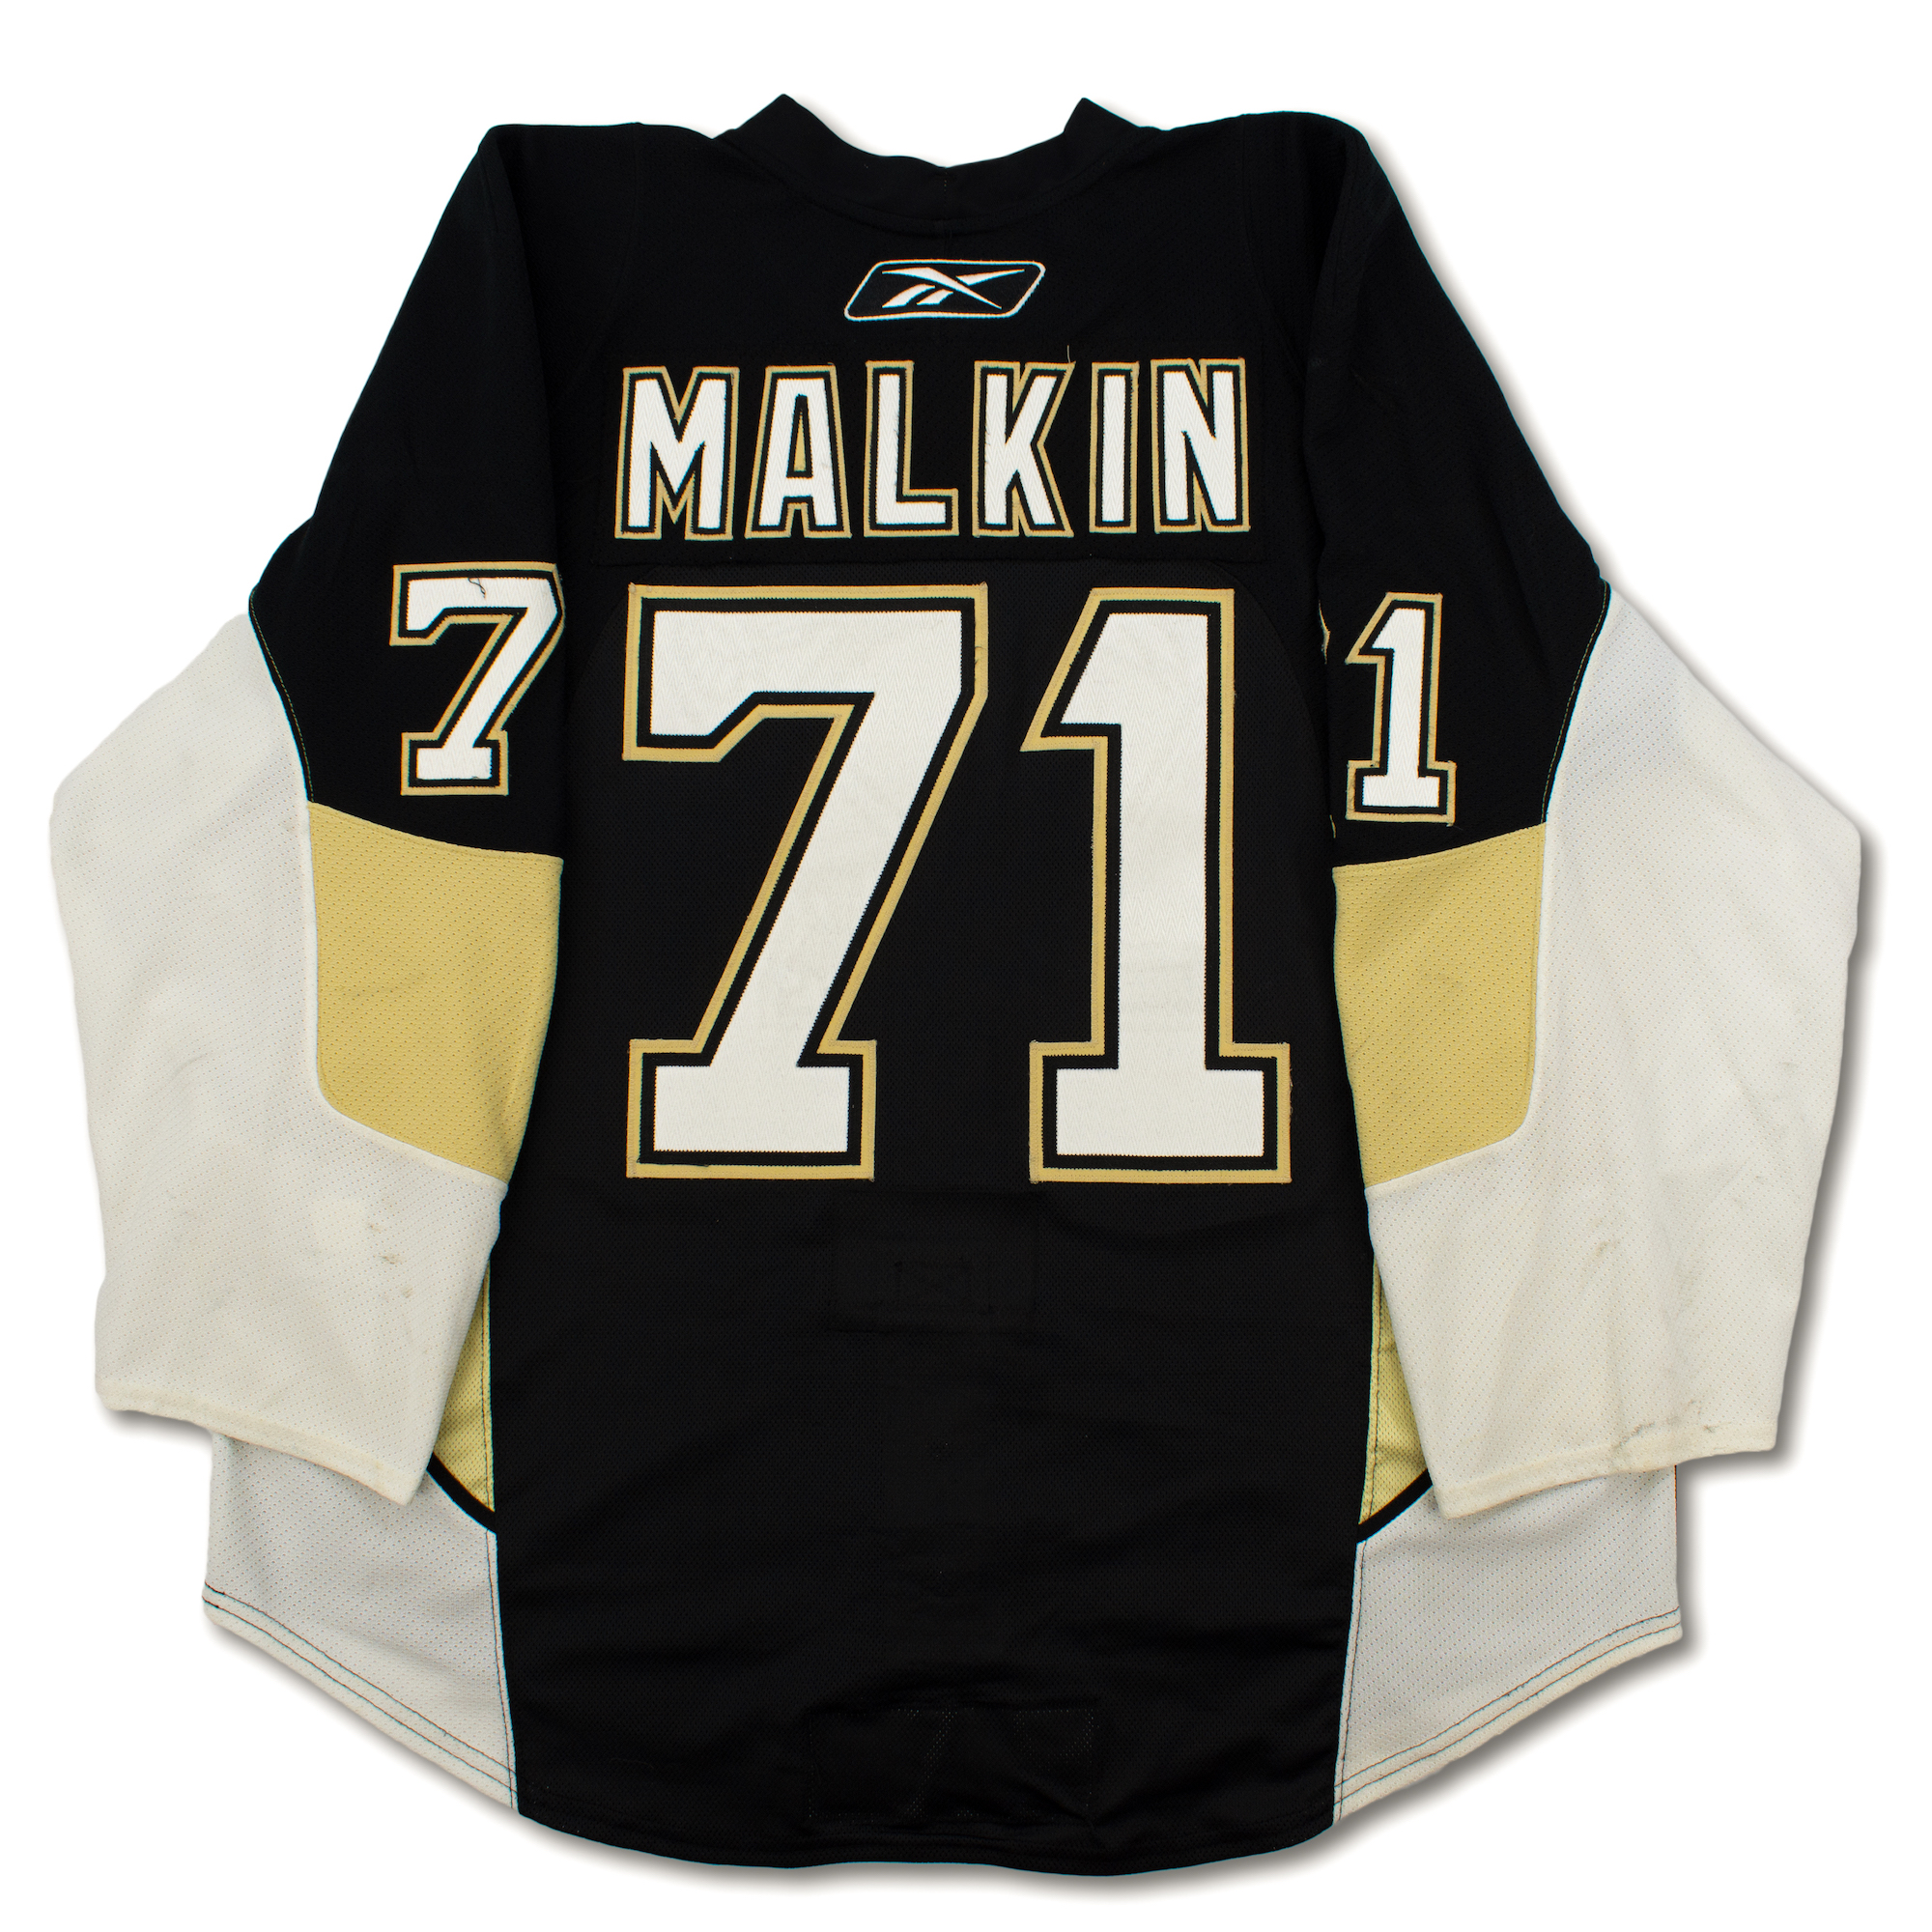 Evgeni Malkin Signed Jersey Allstar Replica 2009 Red - NHL Auctions